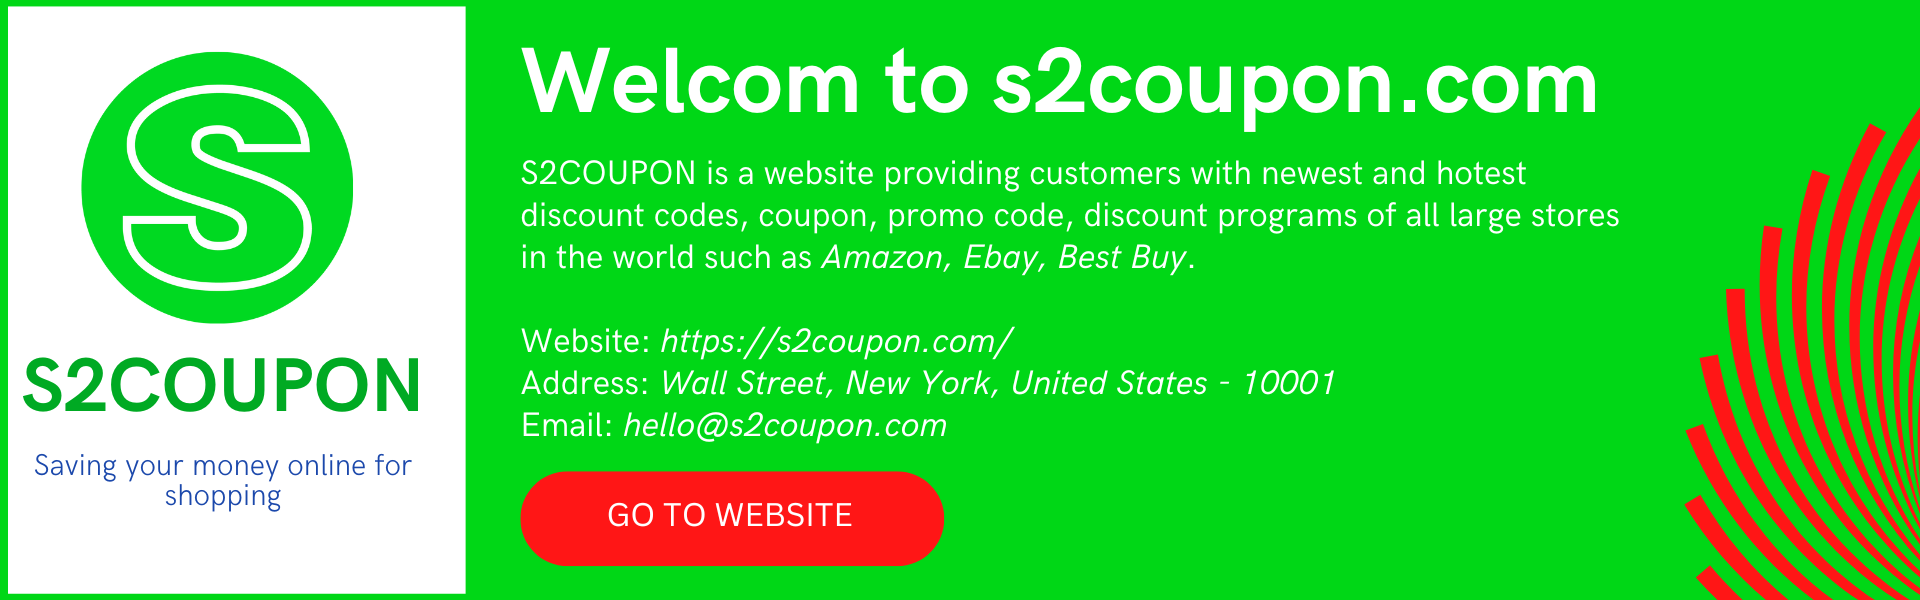 S2COUPON – Saving your money online for shopping